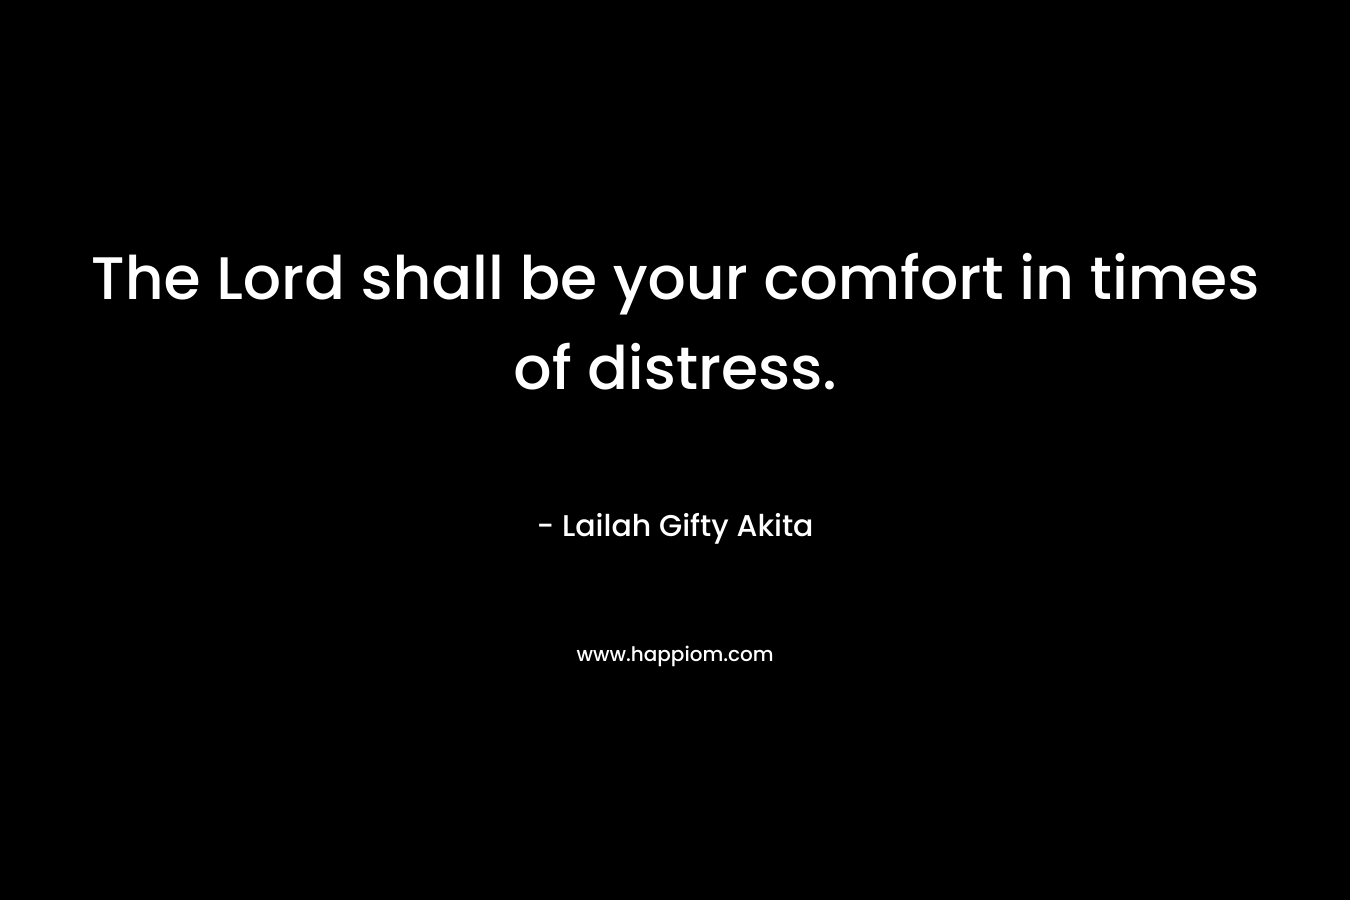 The Lord shall be your comfort in times of distress.